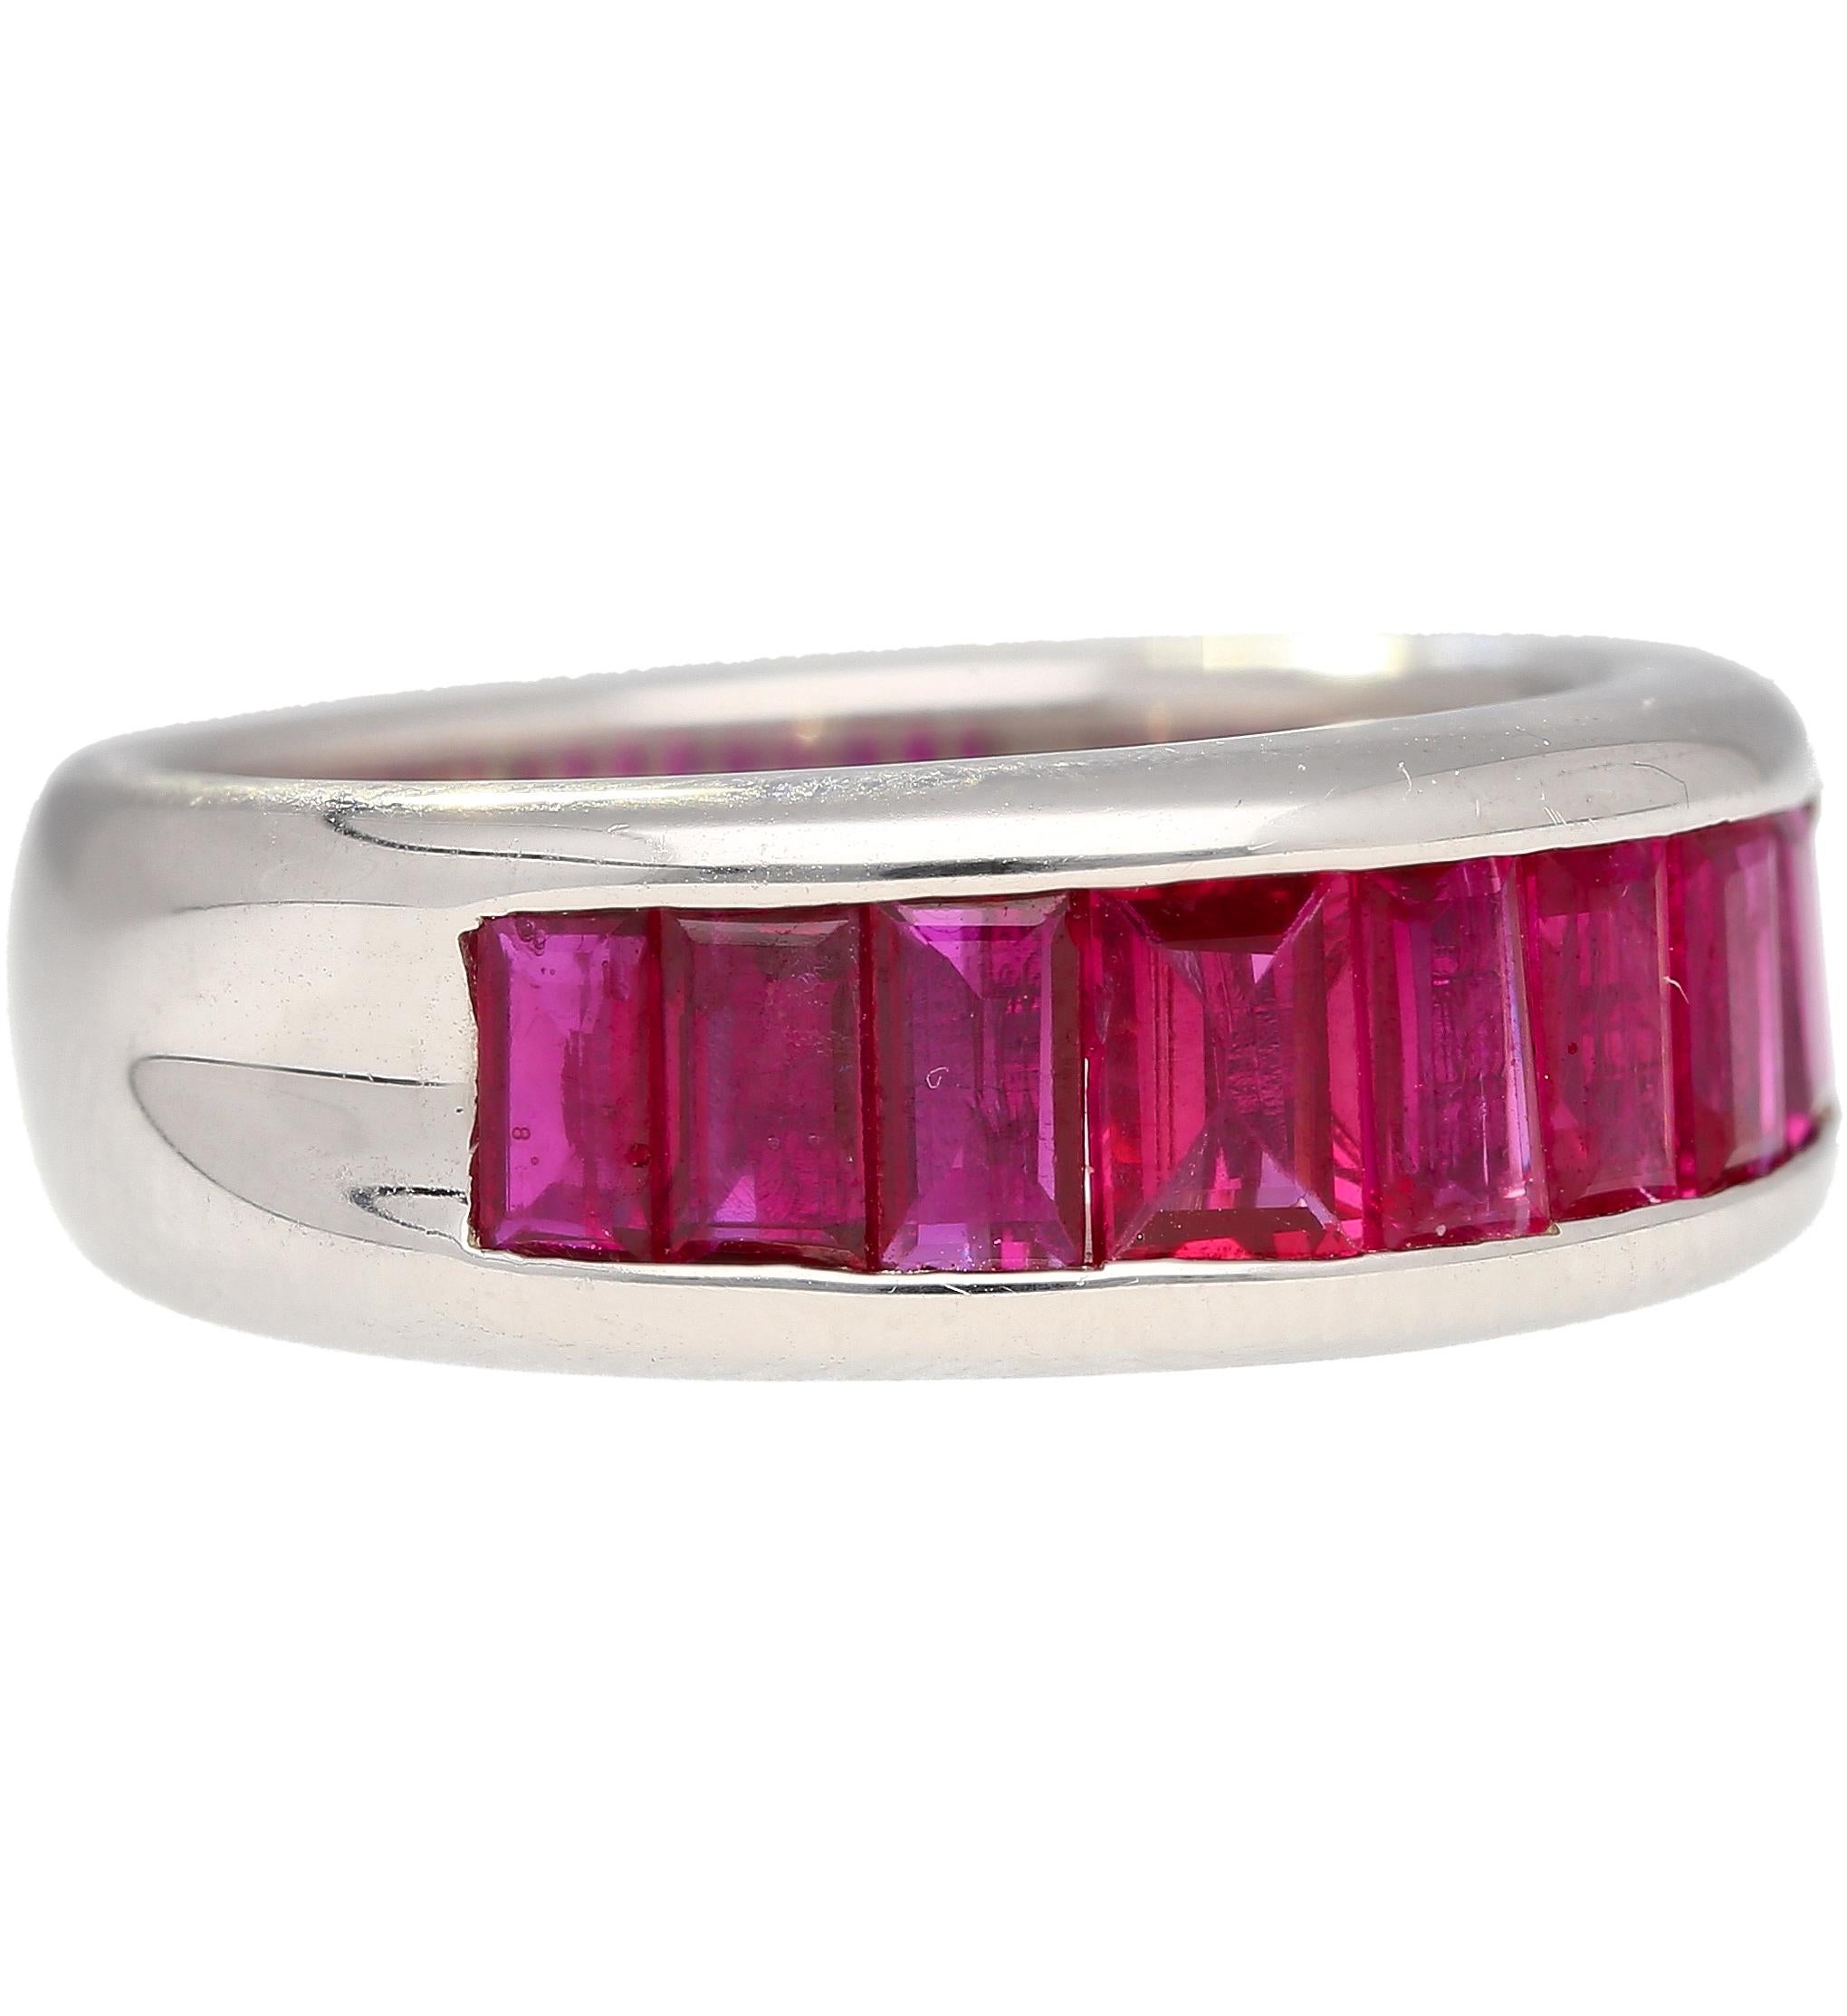 18k solid white gold sets this stunning natural baguette cut ruby ring. The rubies are channel tension set, with a seamless design that offers a glorious hall of mirrors effect when worn on the finger. Each ruby features a pinkish-red color hue and